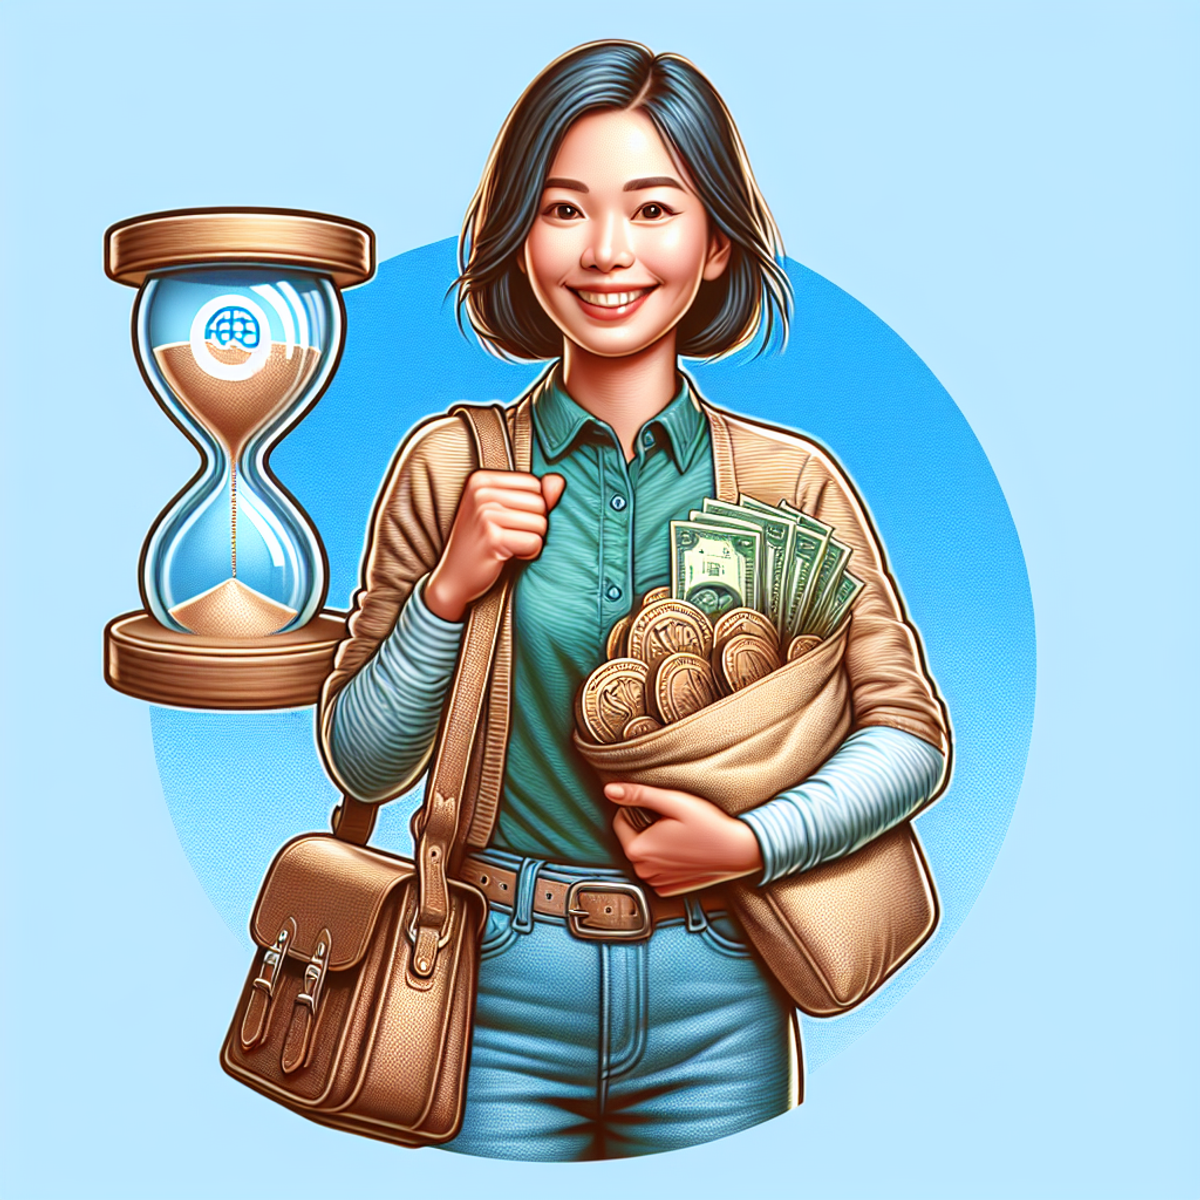 A confident Asian woman smiling while holding a bag of money, with an hourglass icon nearby.